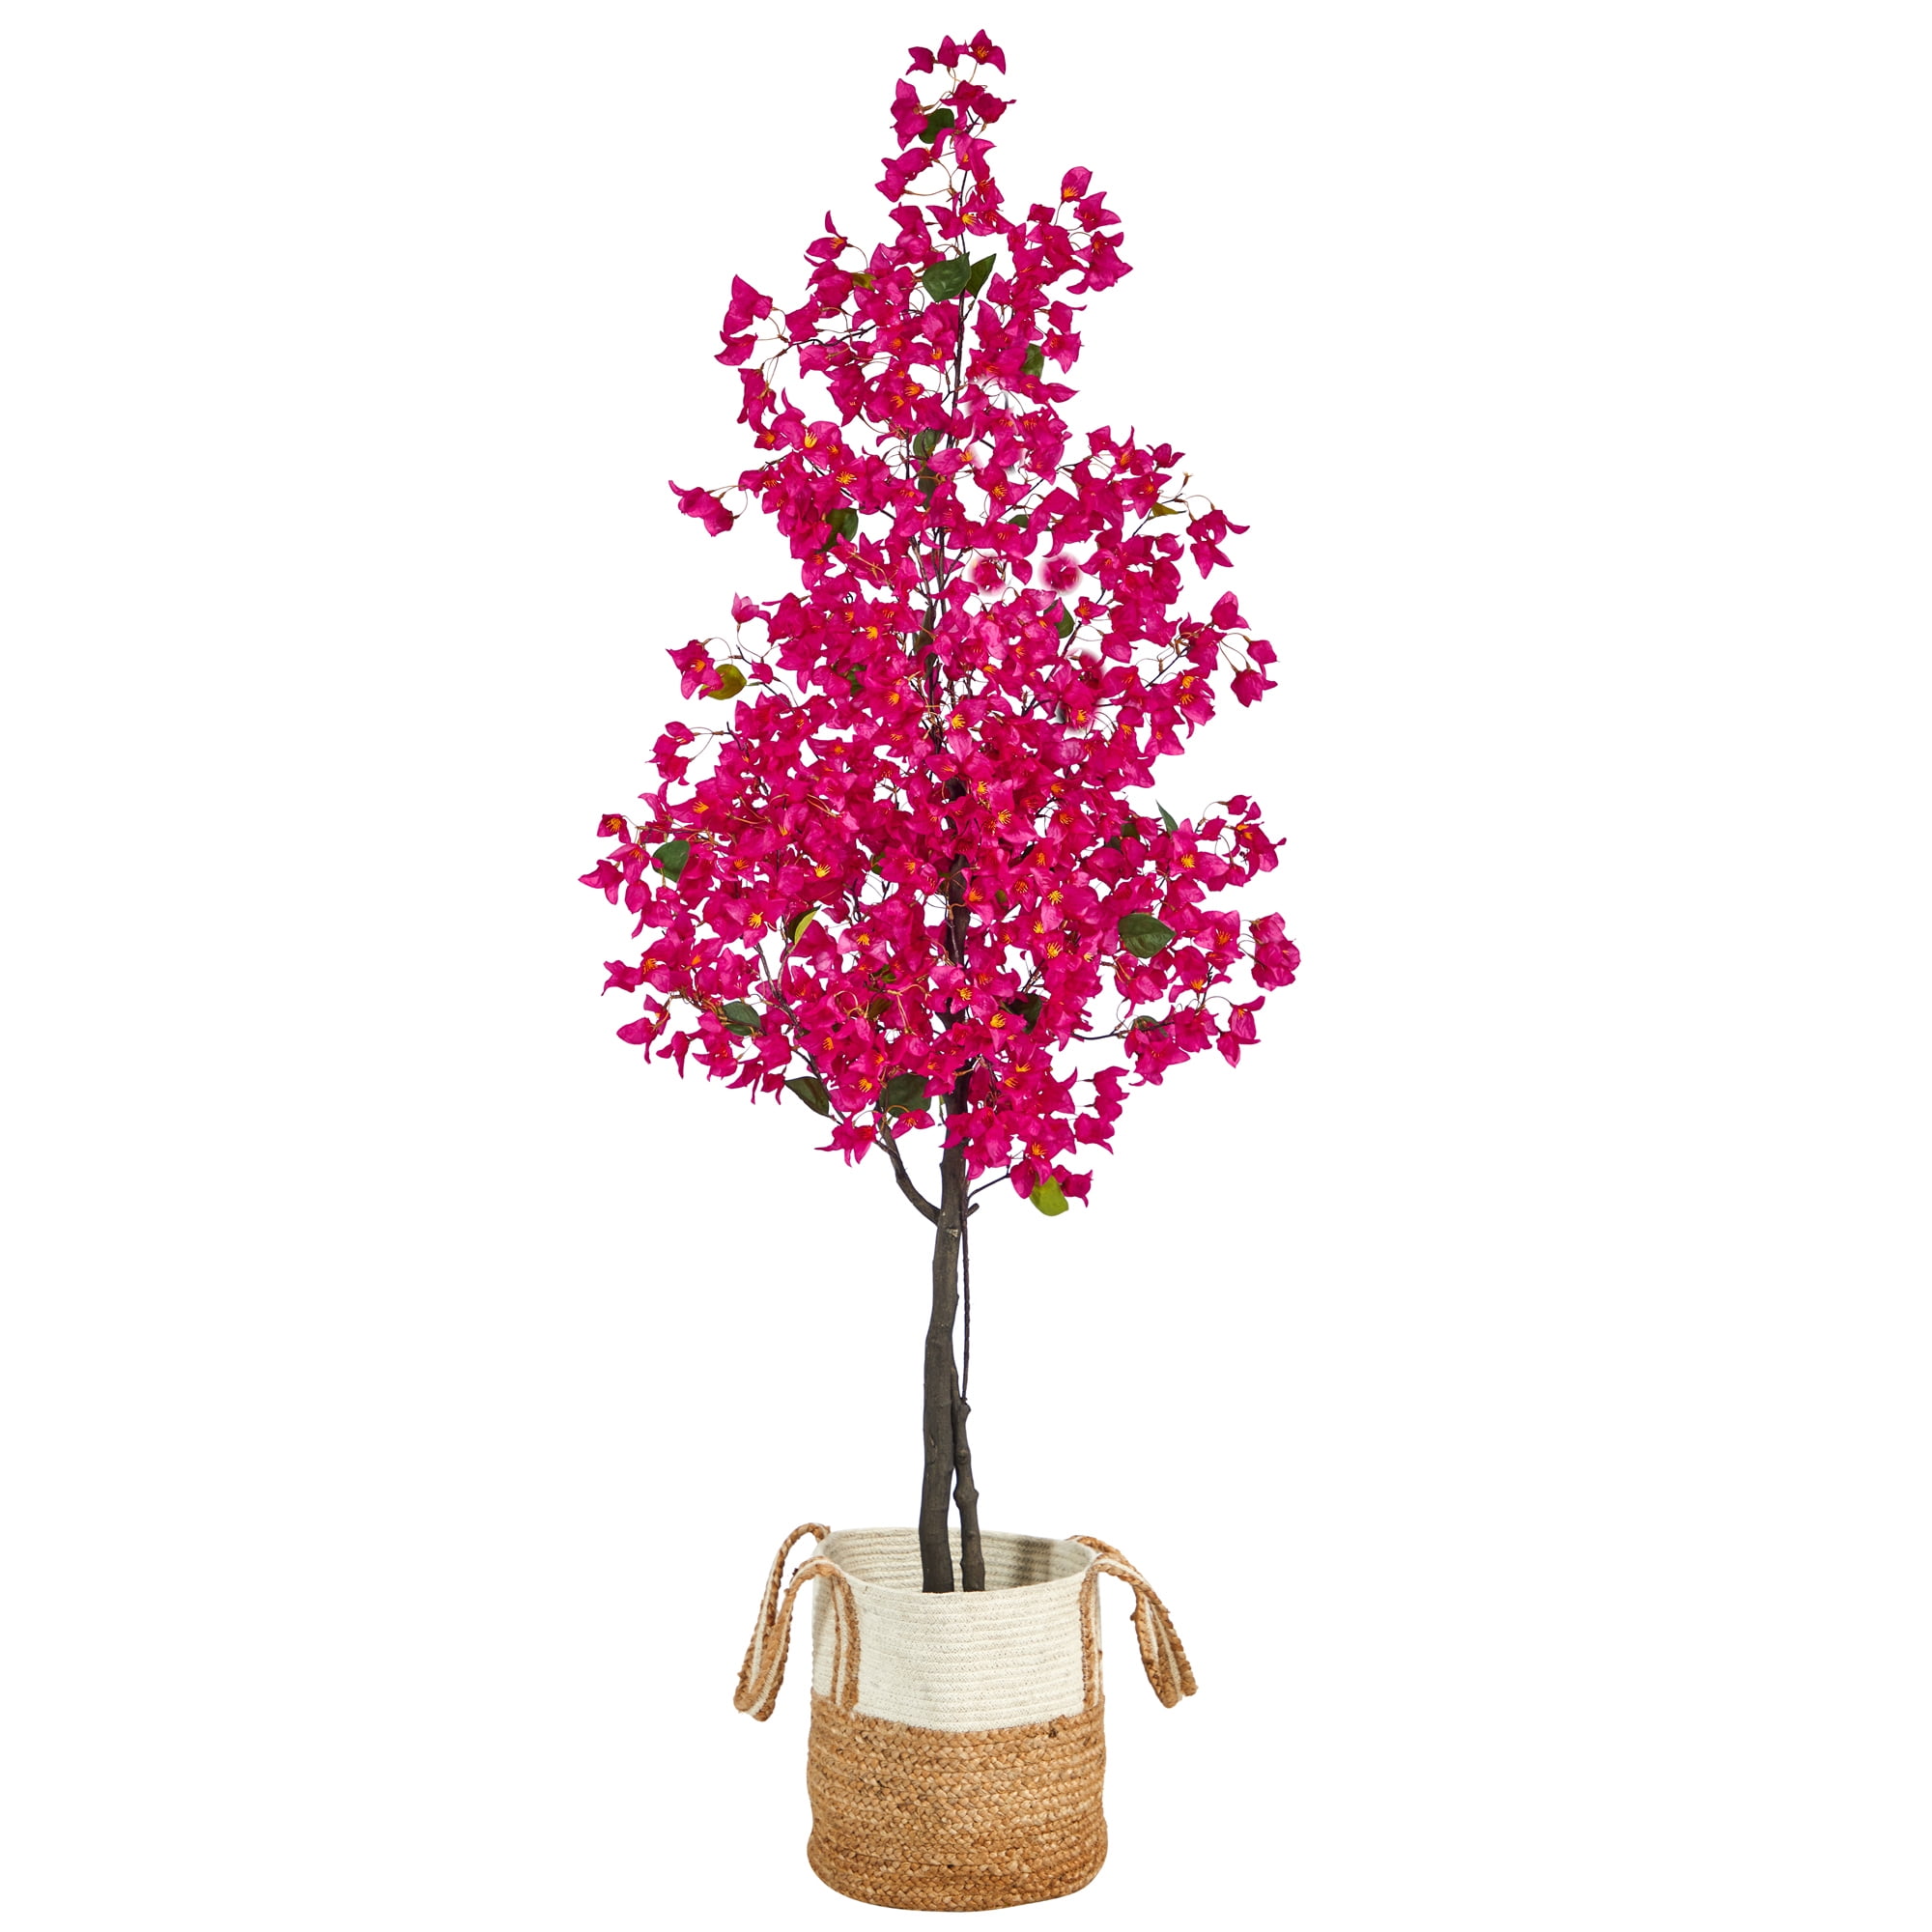 6' Ficus Artificial Tree in Handmade Natural Jute and Cotton Planter